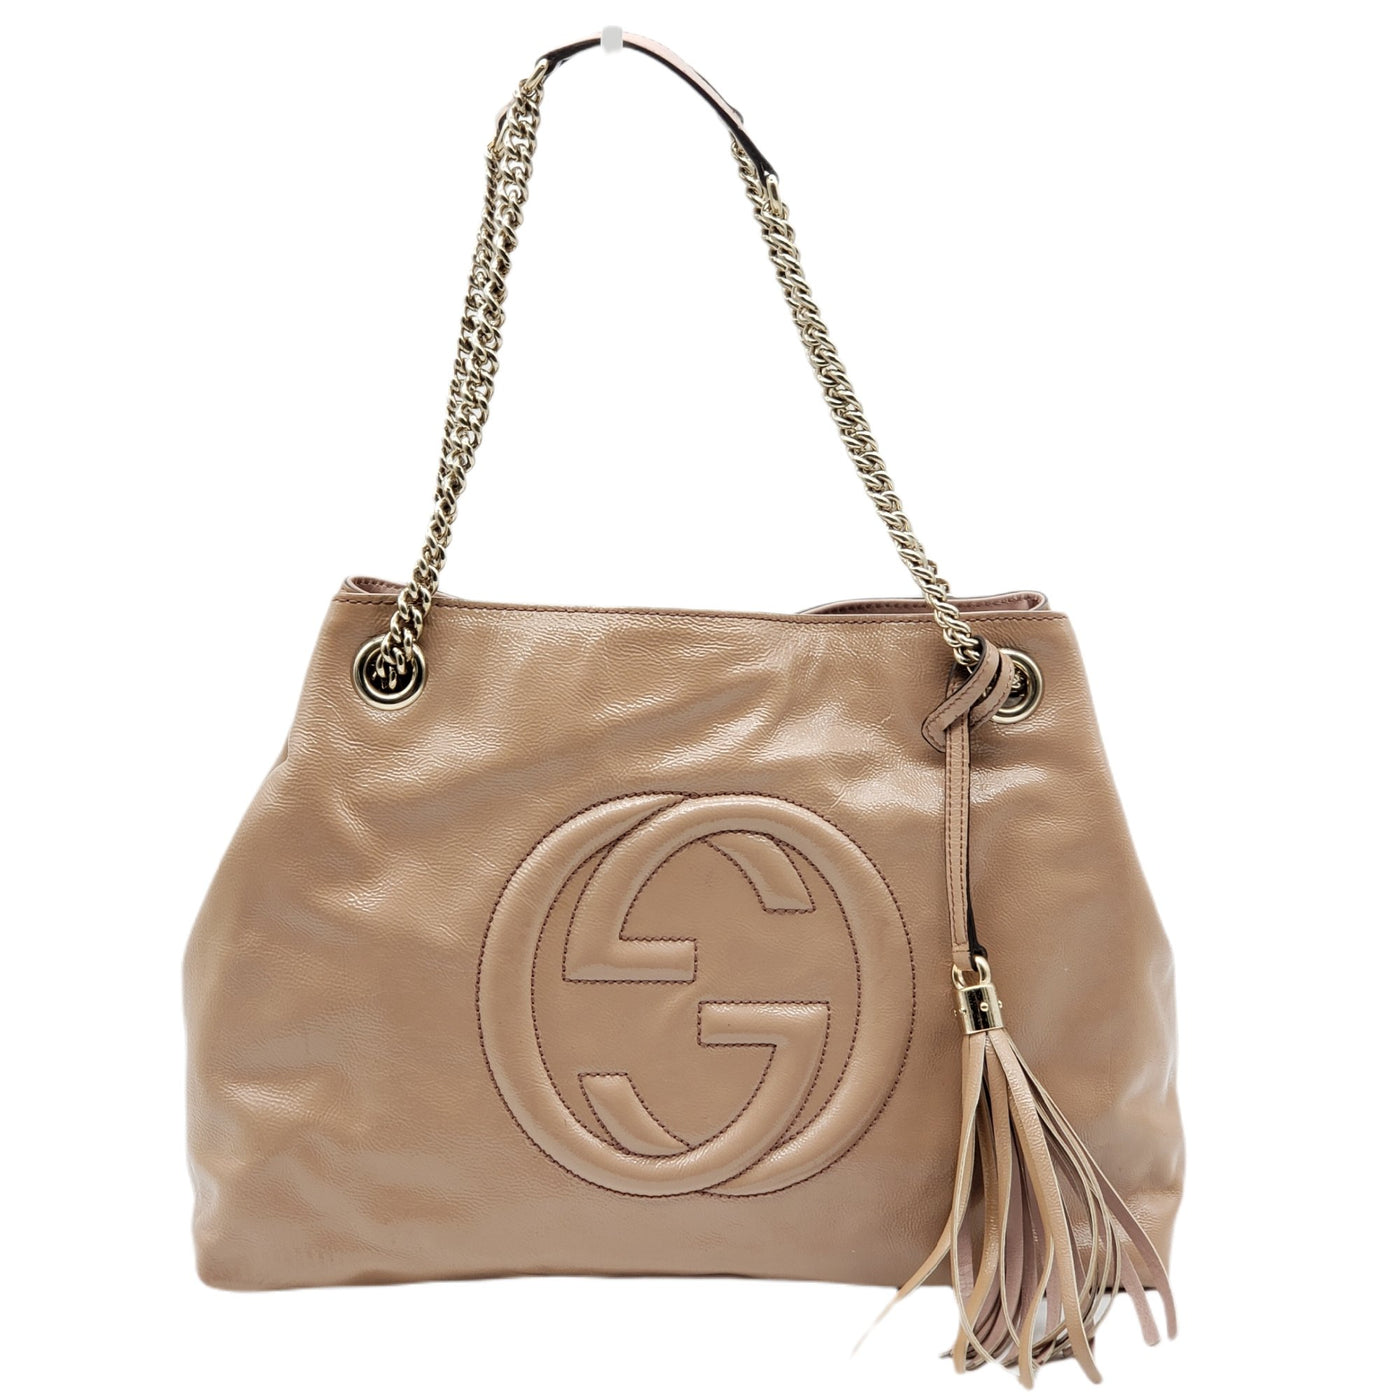 Gucci Soho Patent Leather Shoulder Bag | Luxury Cheaper.